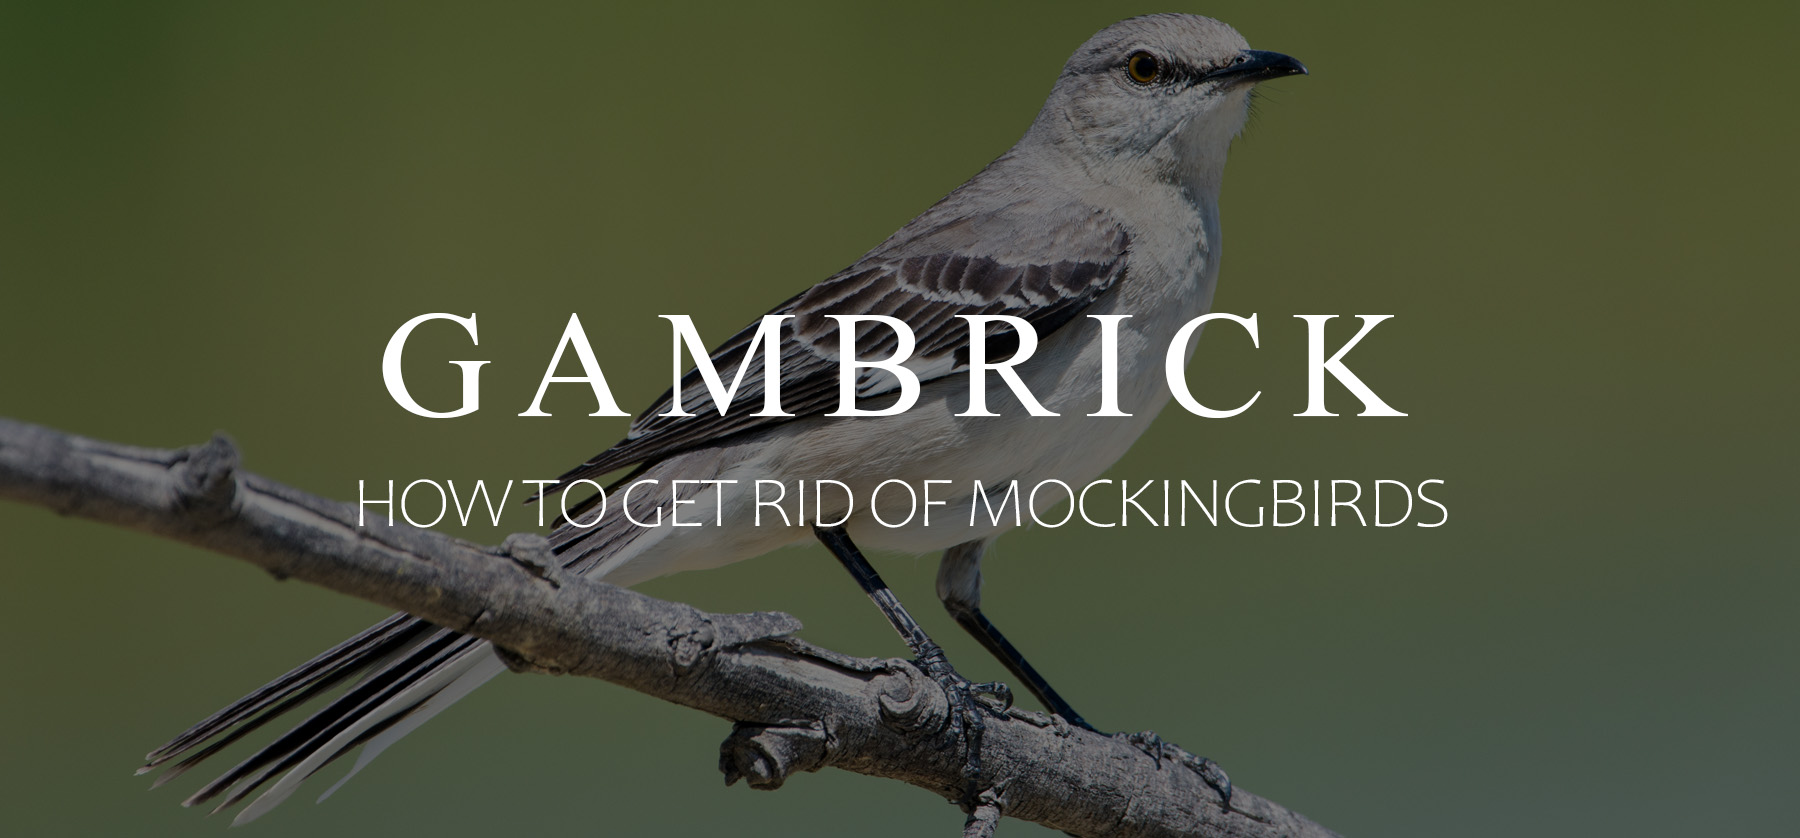 how to get rid of mockingbirds banner